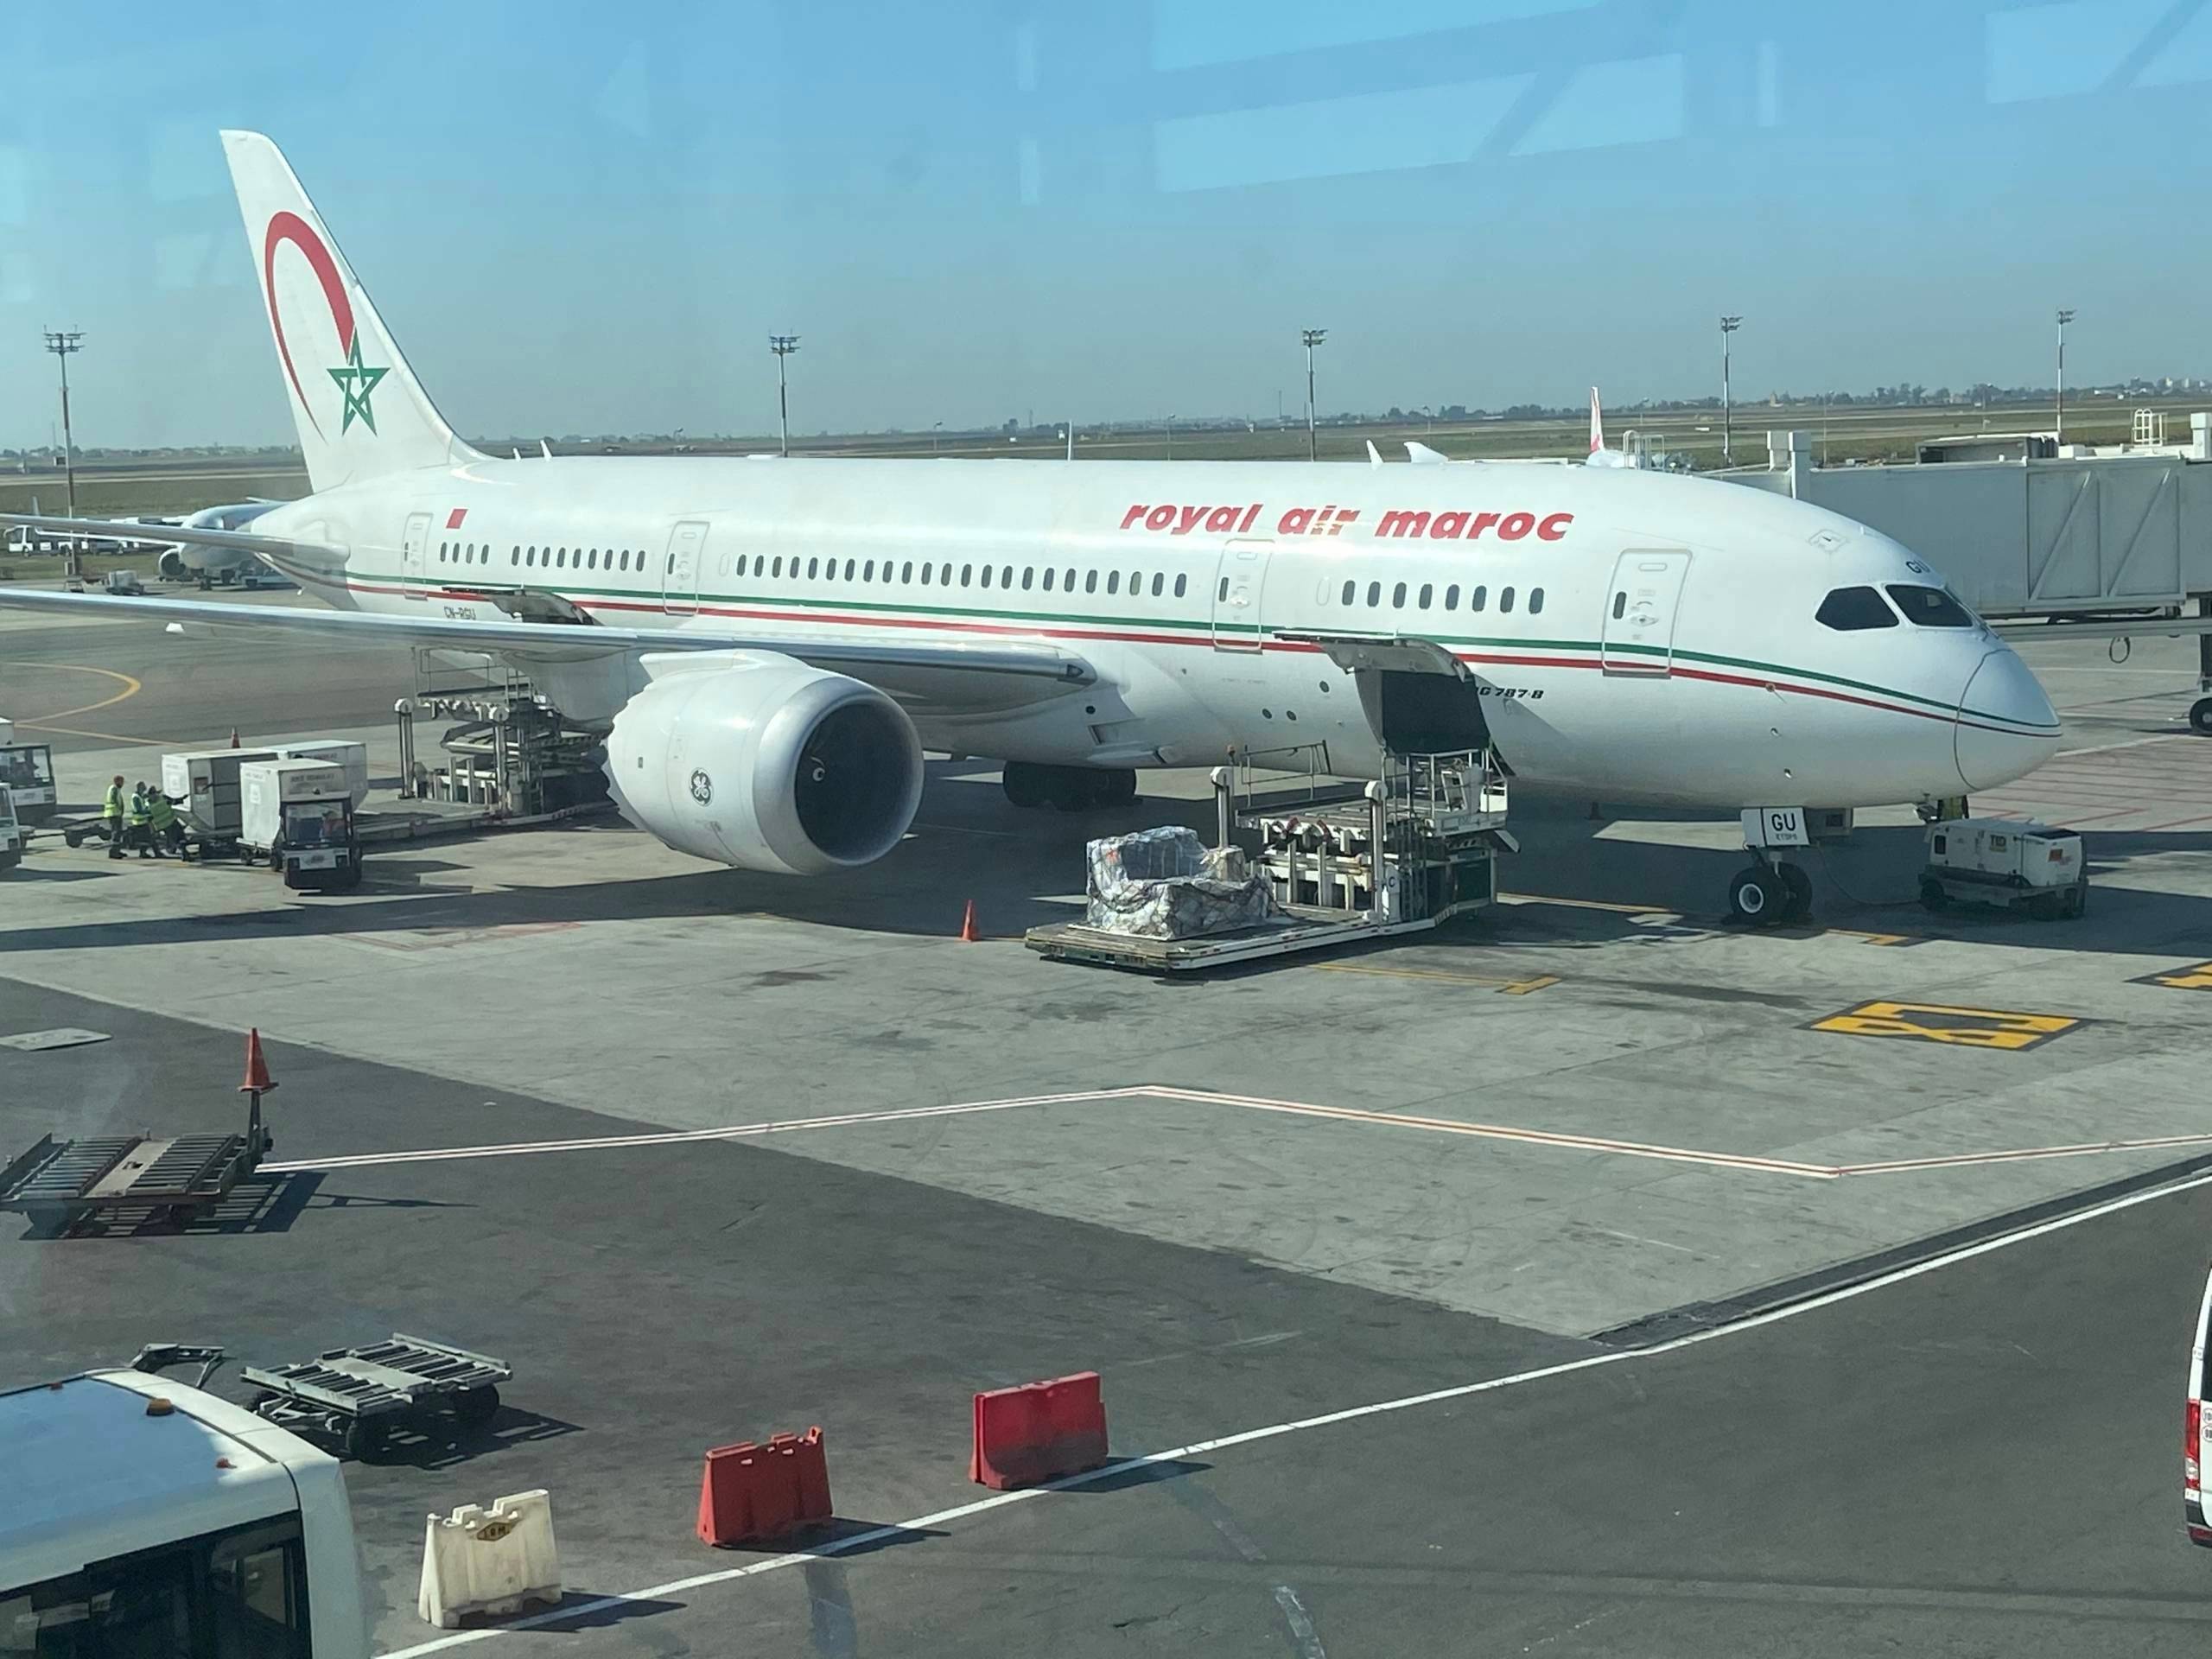 Royal air maroc route map and destinations - flightconnections